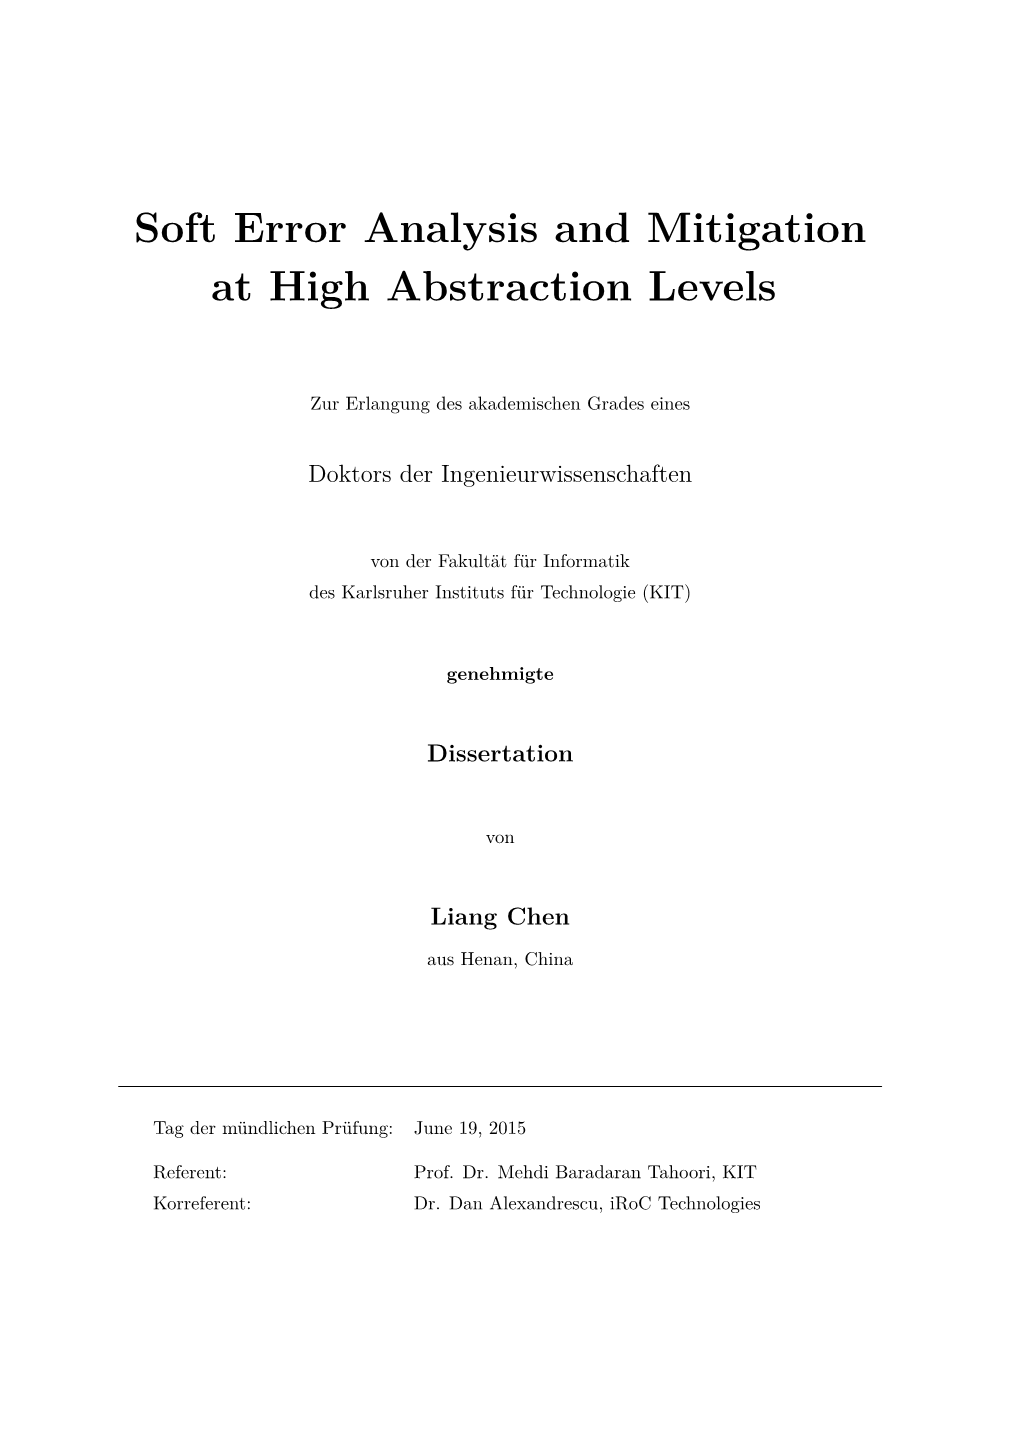 Soft Error Analysis and Mitigation at High Abstraction Levels